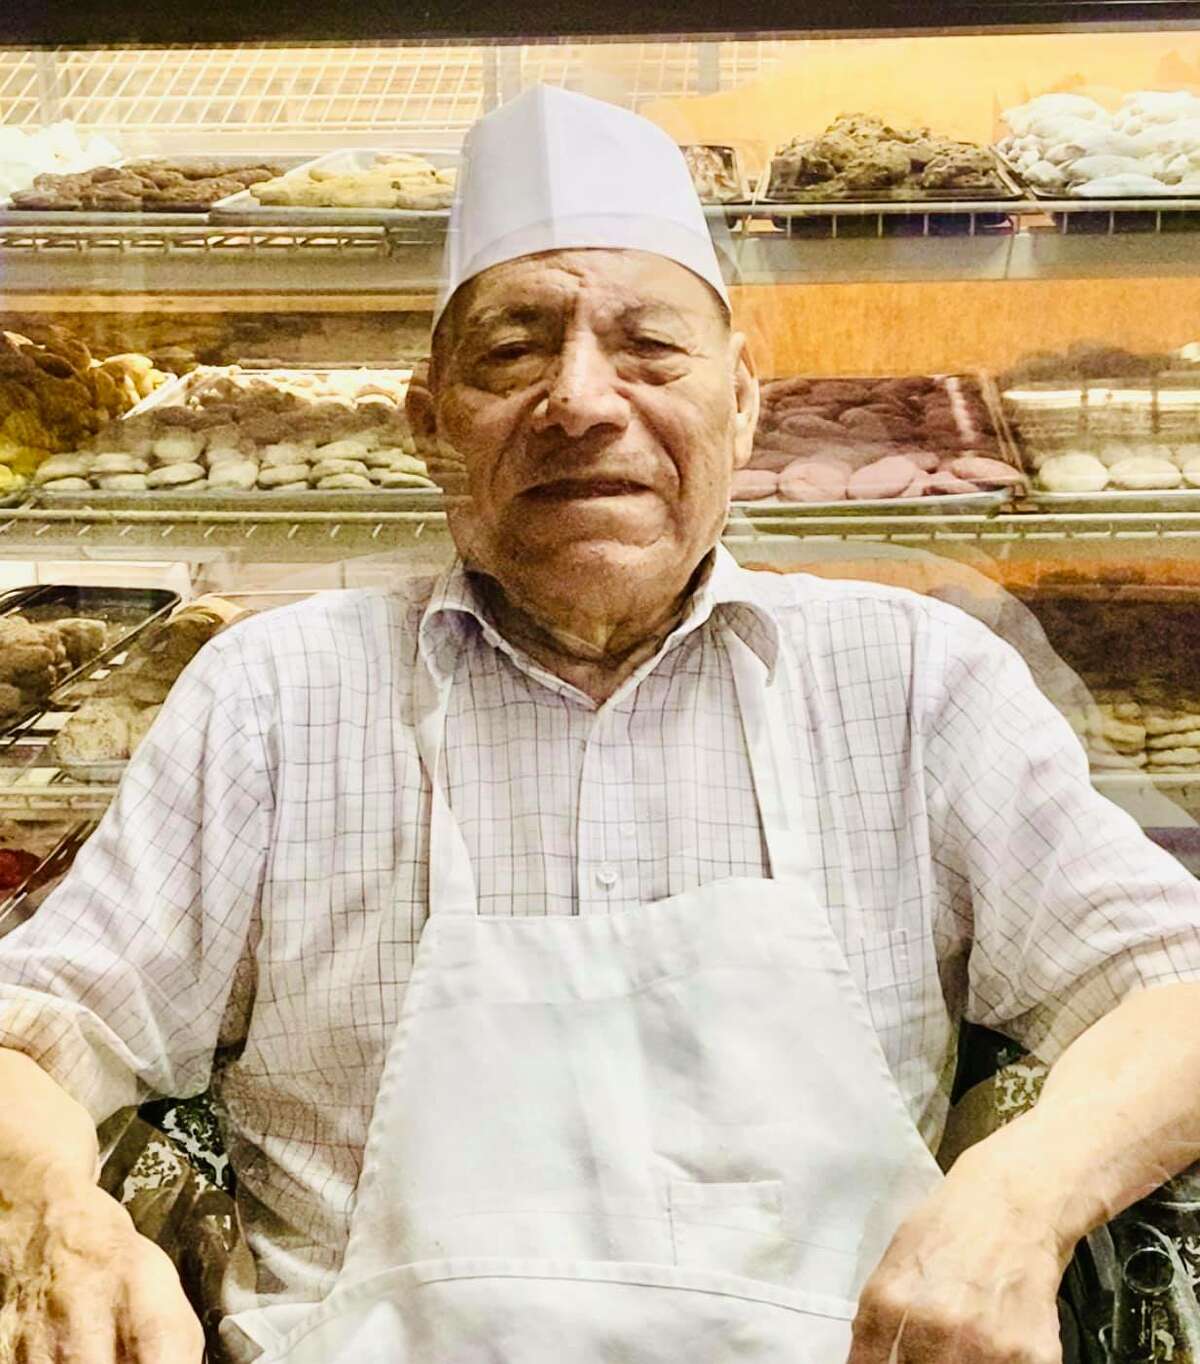 After nearly half a century, Los Cocos Bakery will no longer be included in San Antonio options for Thanksgiving sweets.